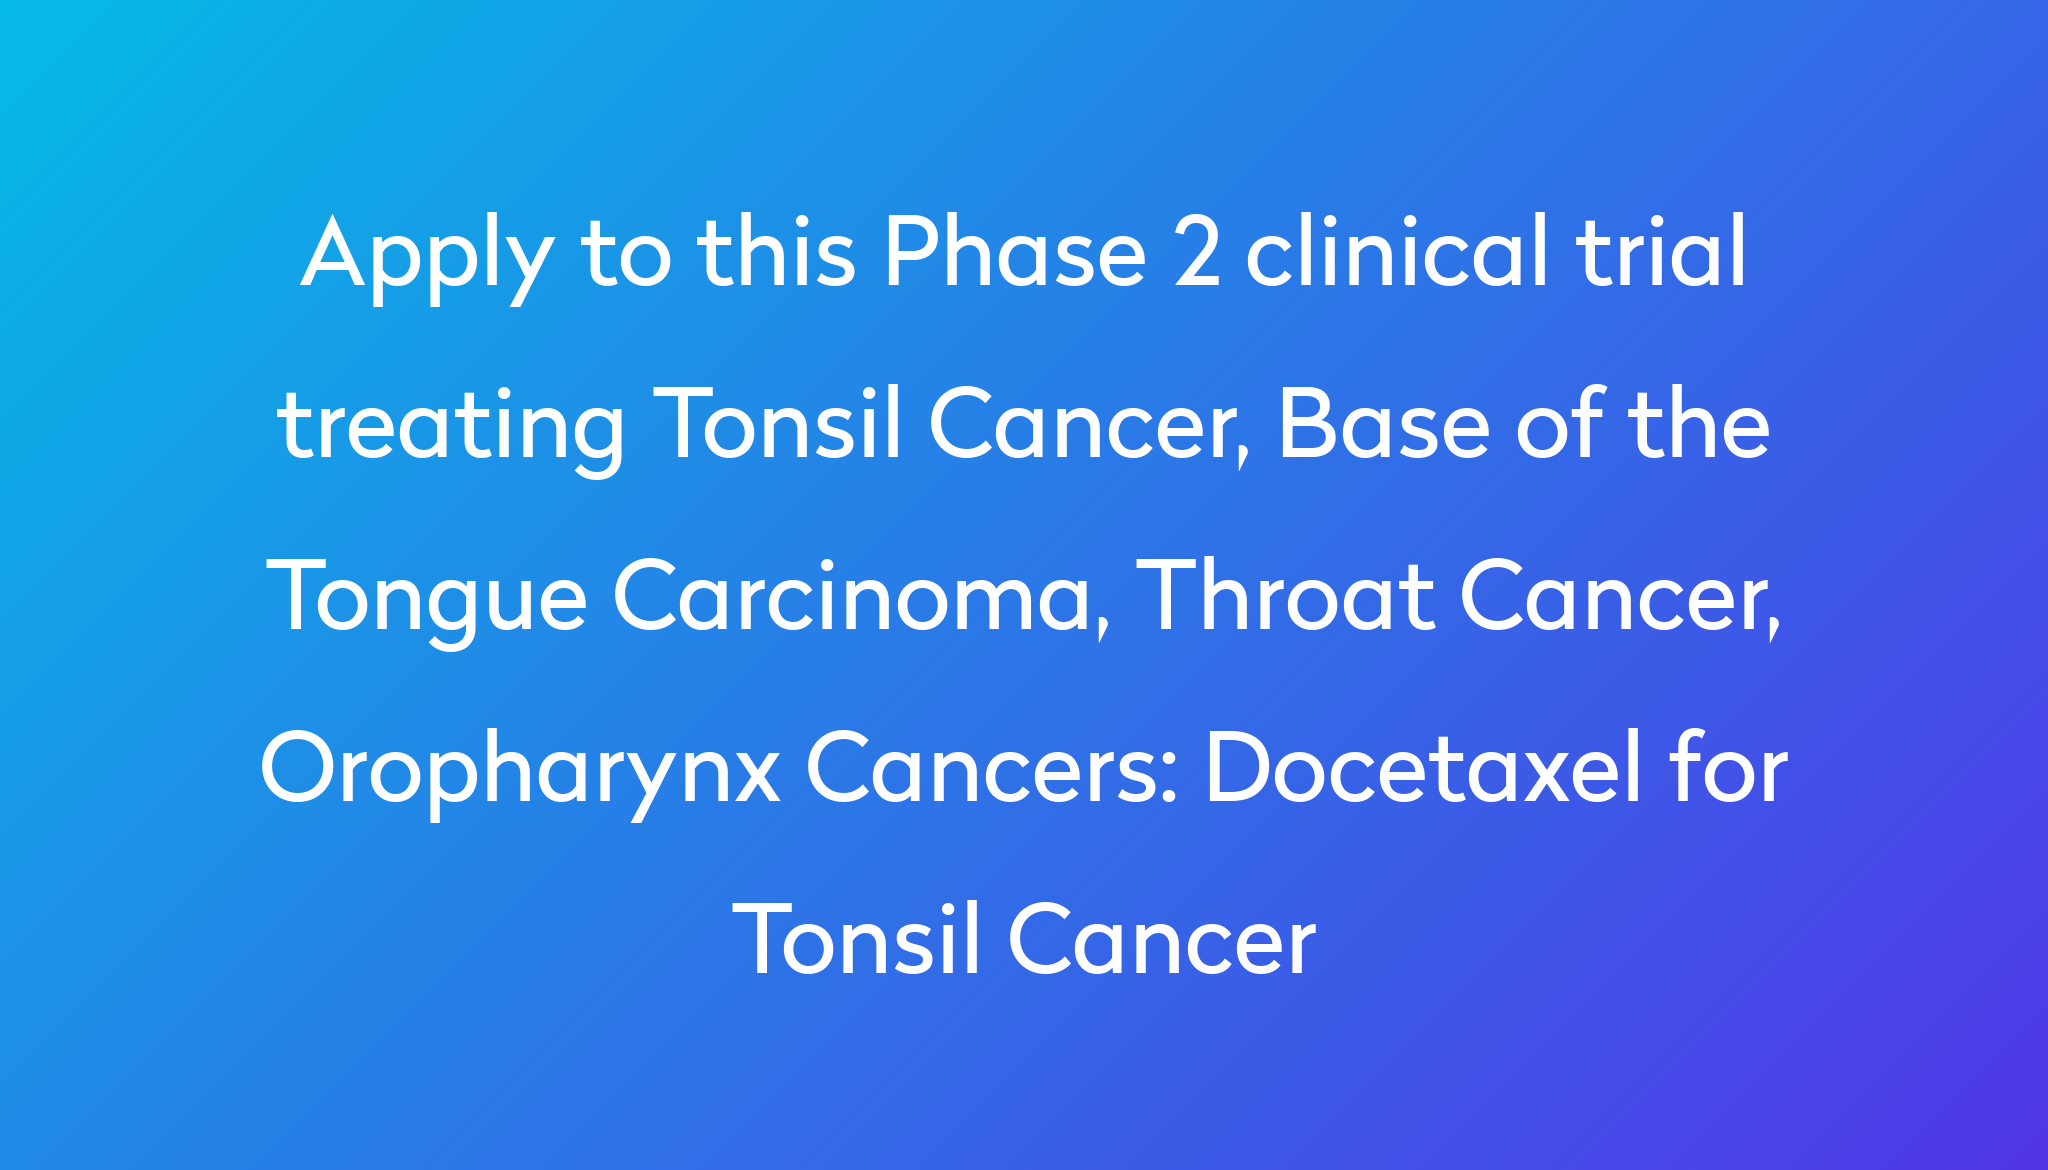 Apply To This Phase 2 Clinical Trial Treating Tonsil Cancer, Base Of The Tongue Carcinoma, Throat Cancer, Oropharynx Cancers %0A%0ADocetaxel For Tonsil Cancer ?md=1